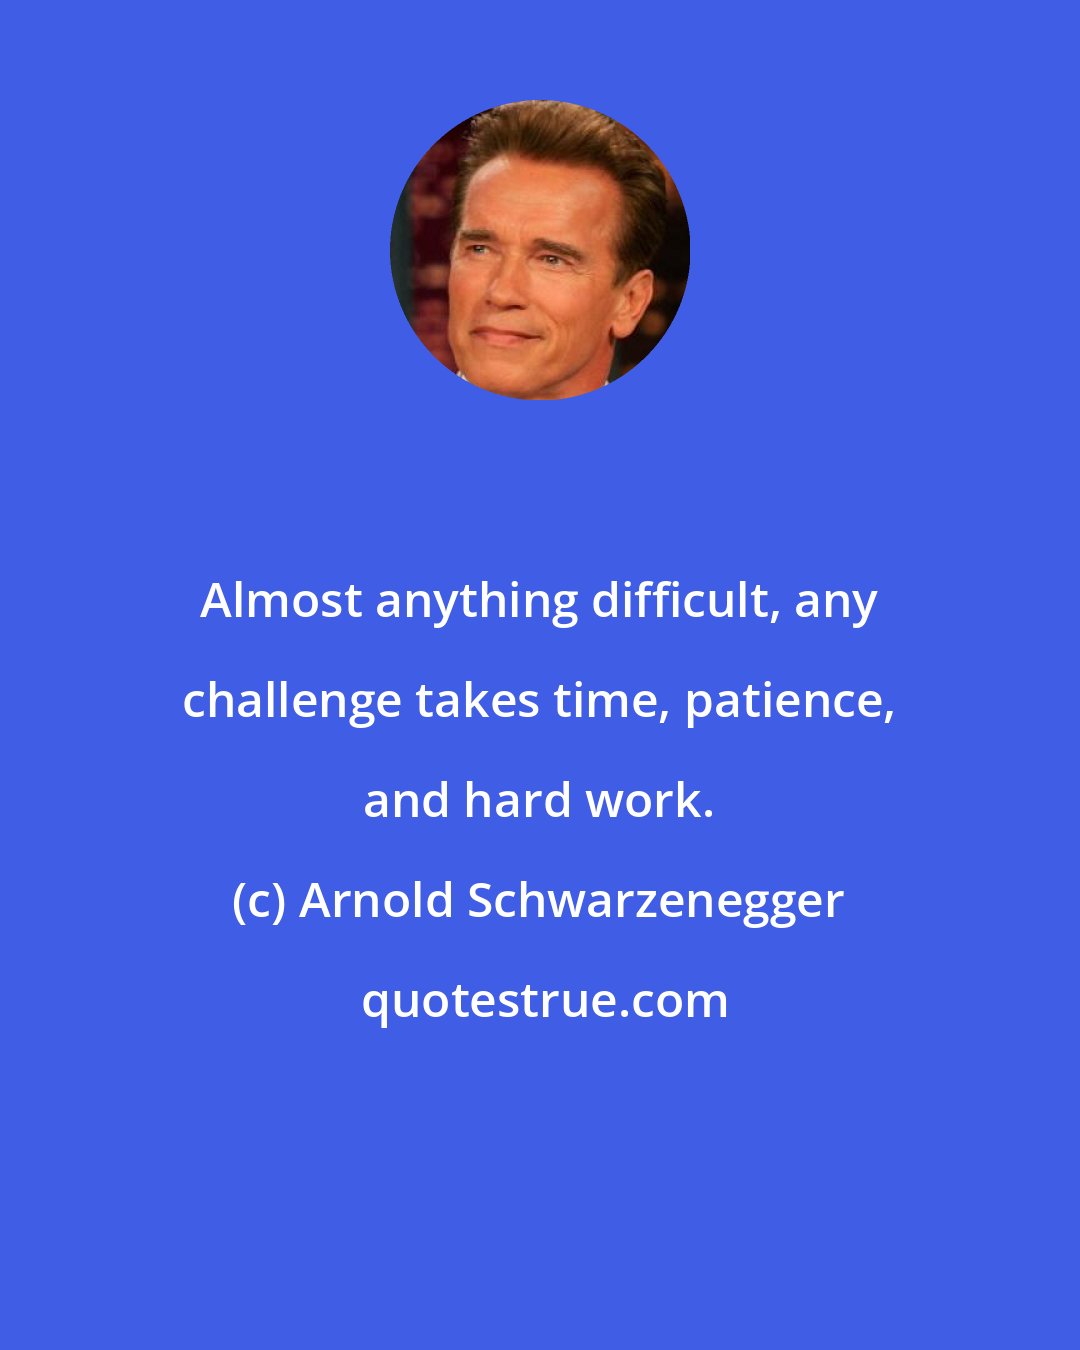 Arnold Schwarzenegger: Almost anything difficult, any challenge takes time, patience, and hard work.